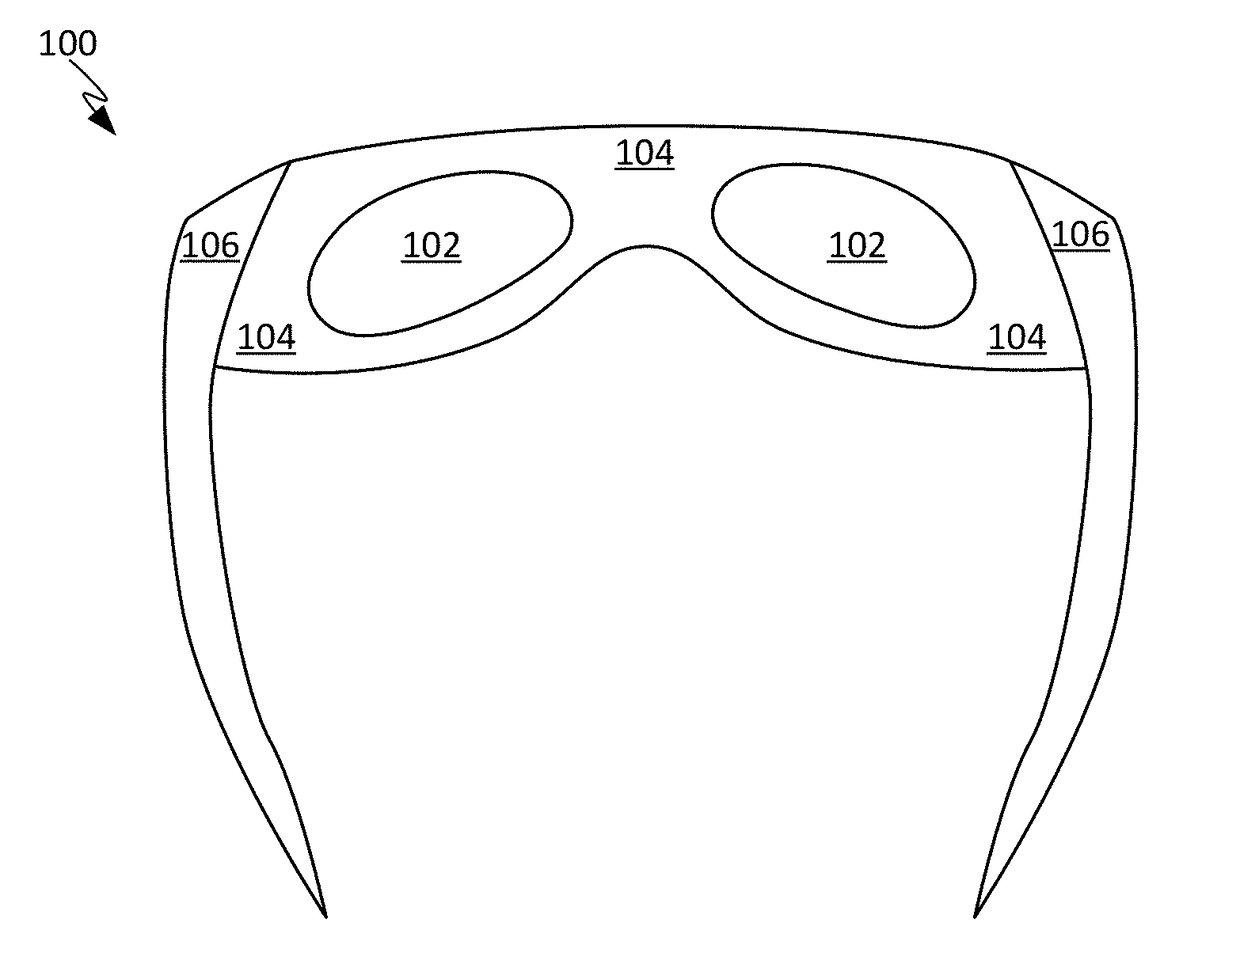 Multi-resolution display assembly for head-mounted display systems